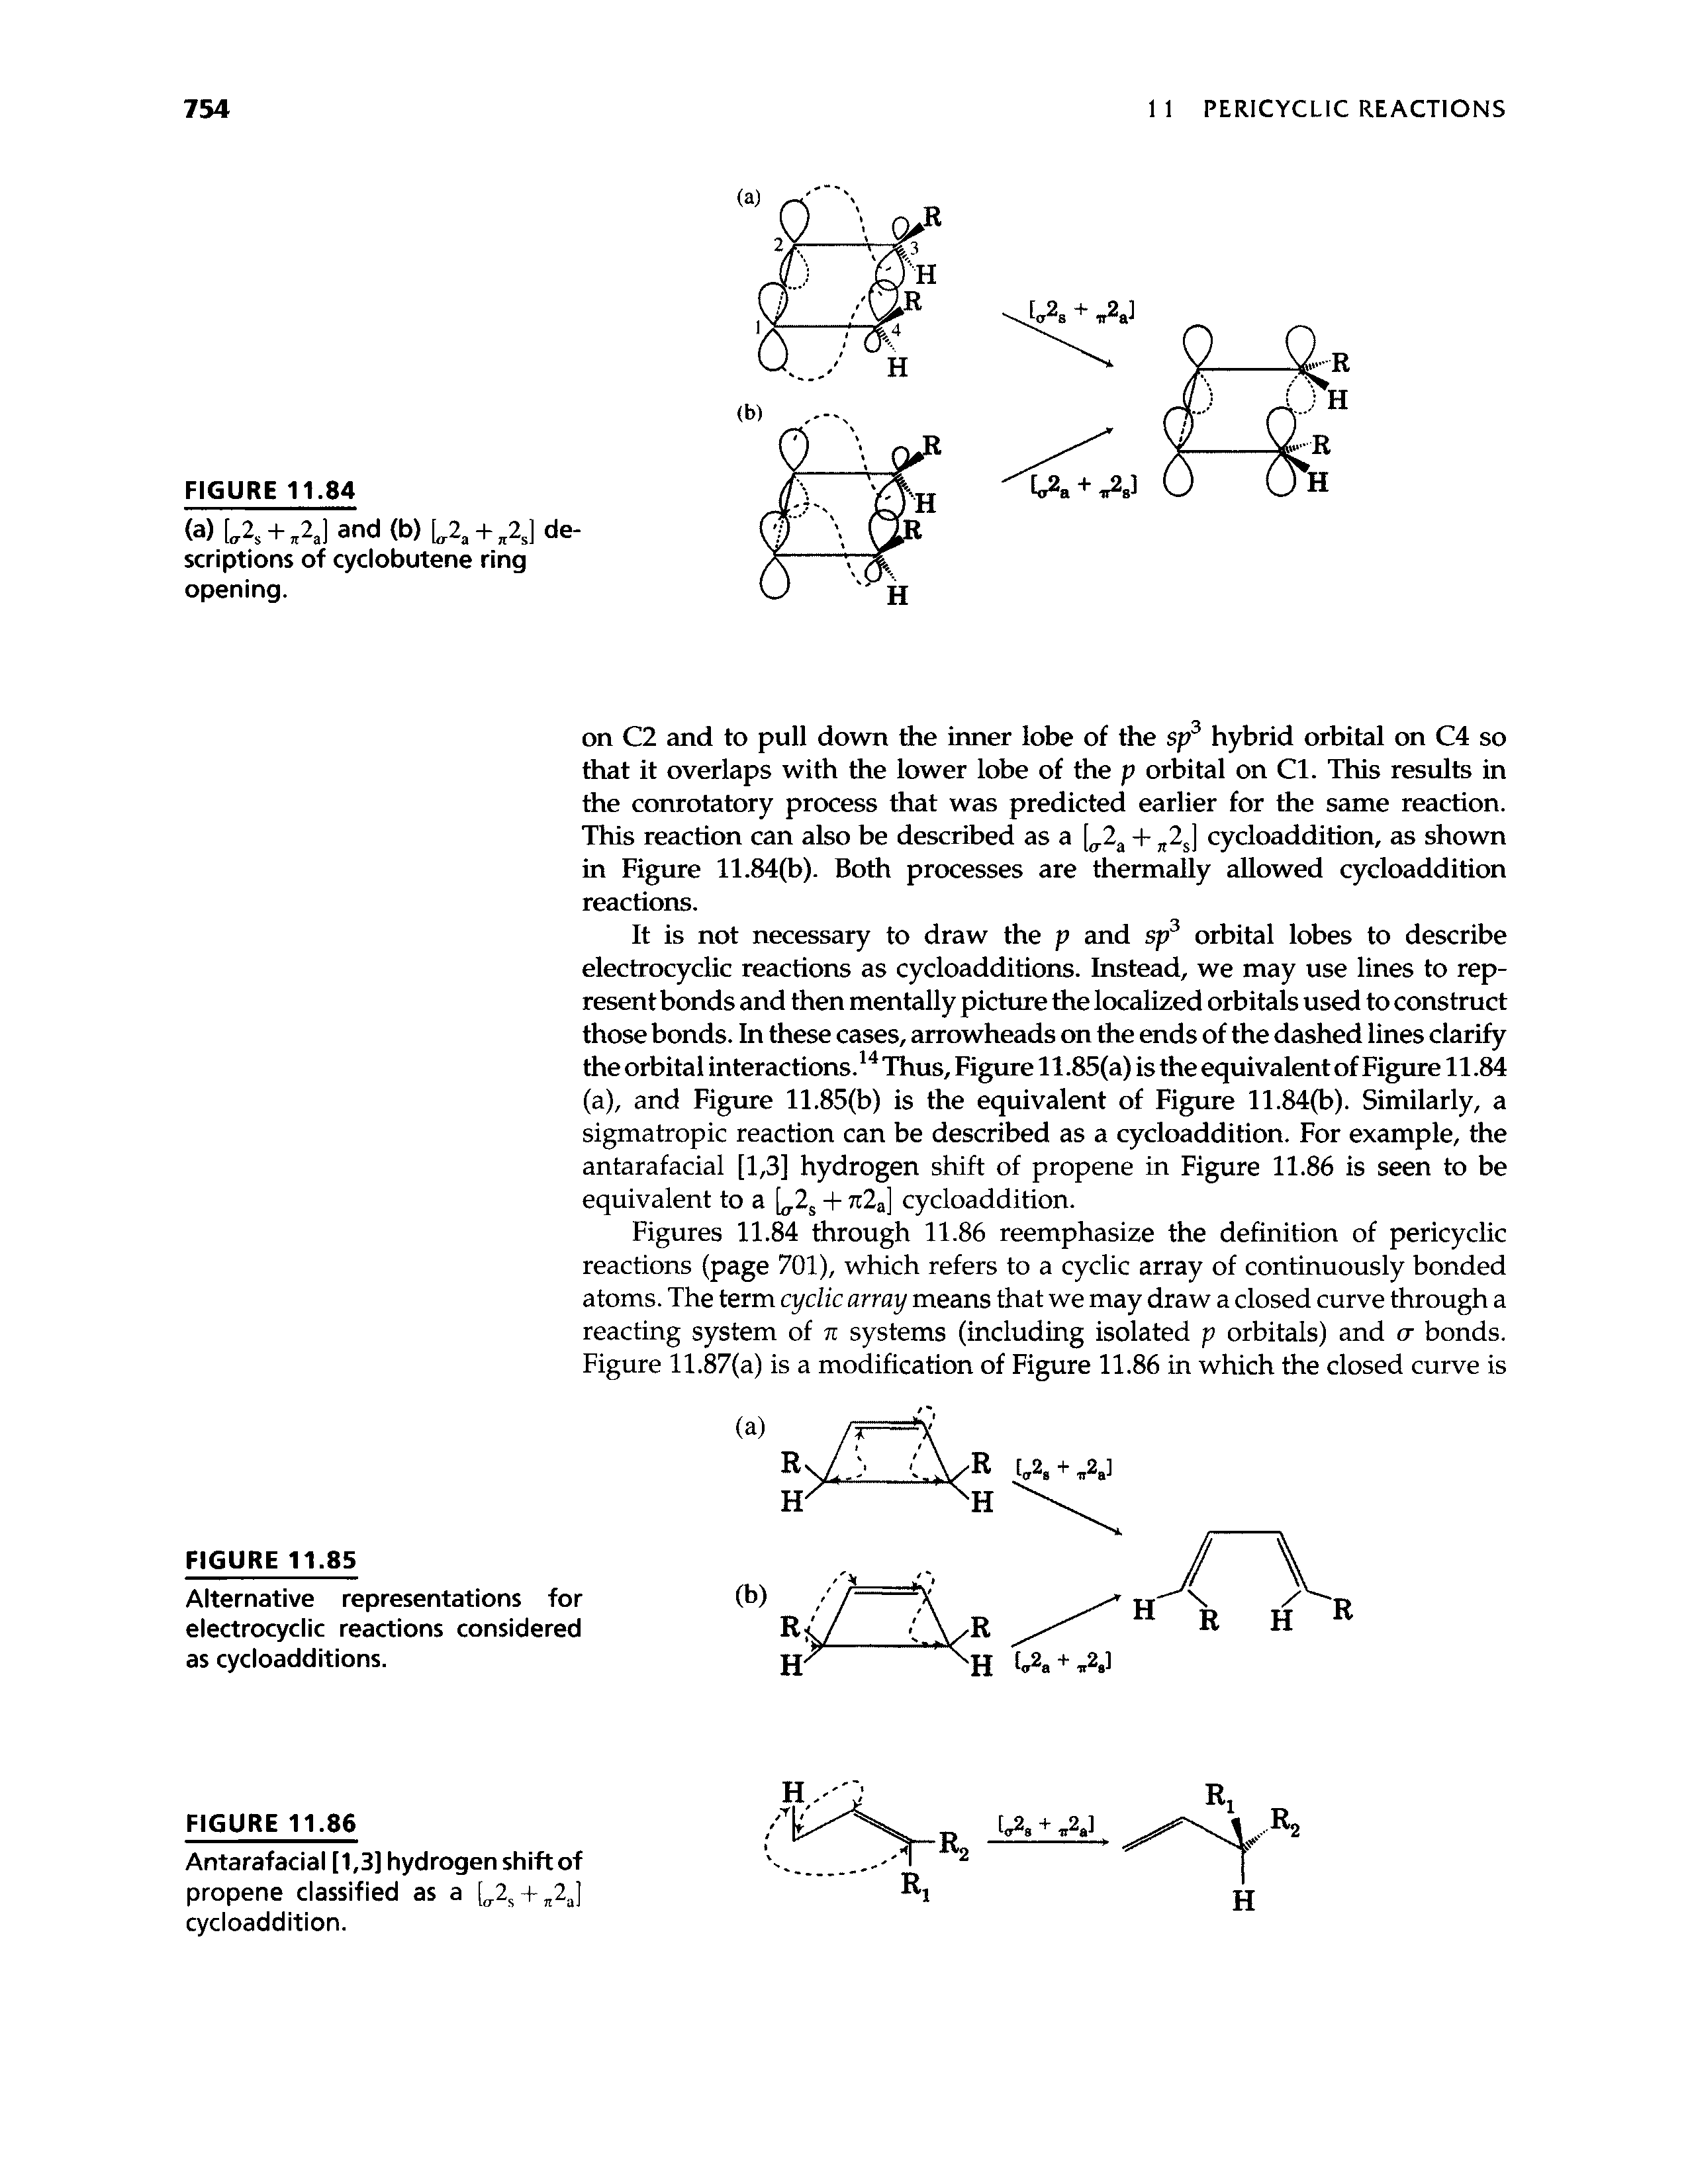 Figures 11.84 through 11.86 reemphasize the definition of pericyclic reactions (page 701), which refers to a cyclic array of continuously bonded atoms. The term cyclic array means that we may draw a closed curve through a reacting system of n systems (including isolated p orbitals) and cr bonds. Figure 11.87(a) is a modification of Figure 11.86 in which the closed curve is...